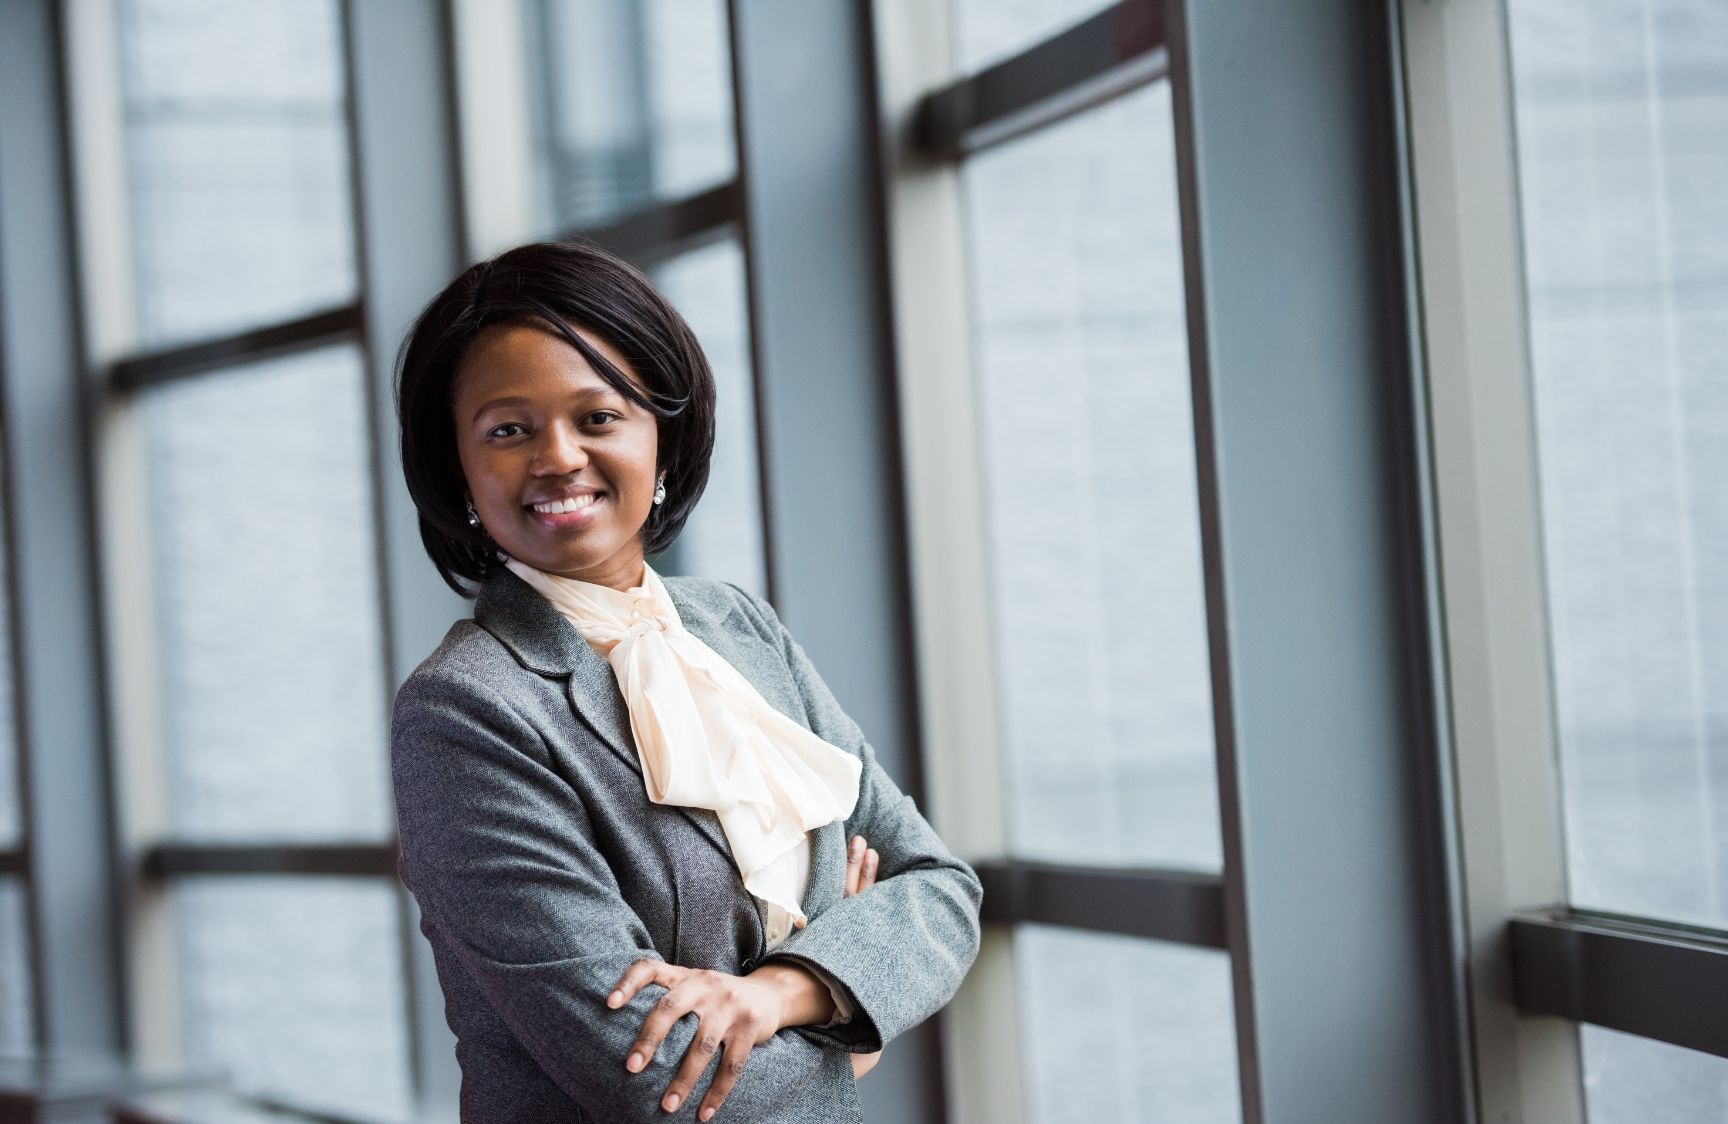 Black business woman smiling and standing with arms crossed in front of large windows